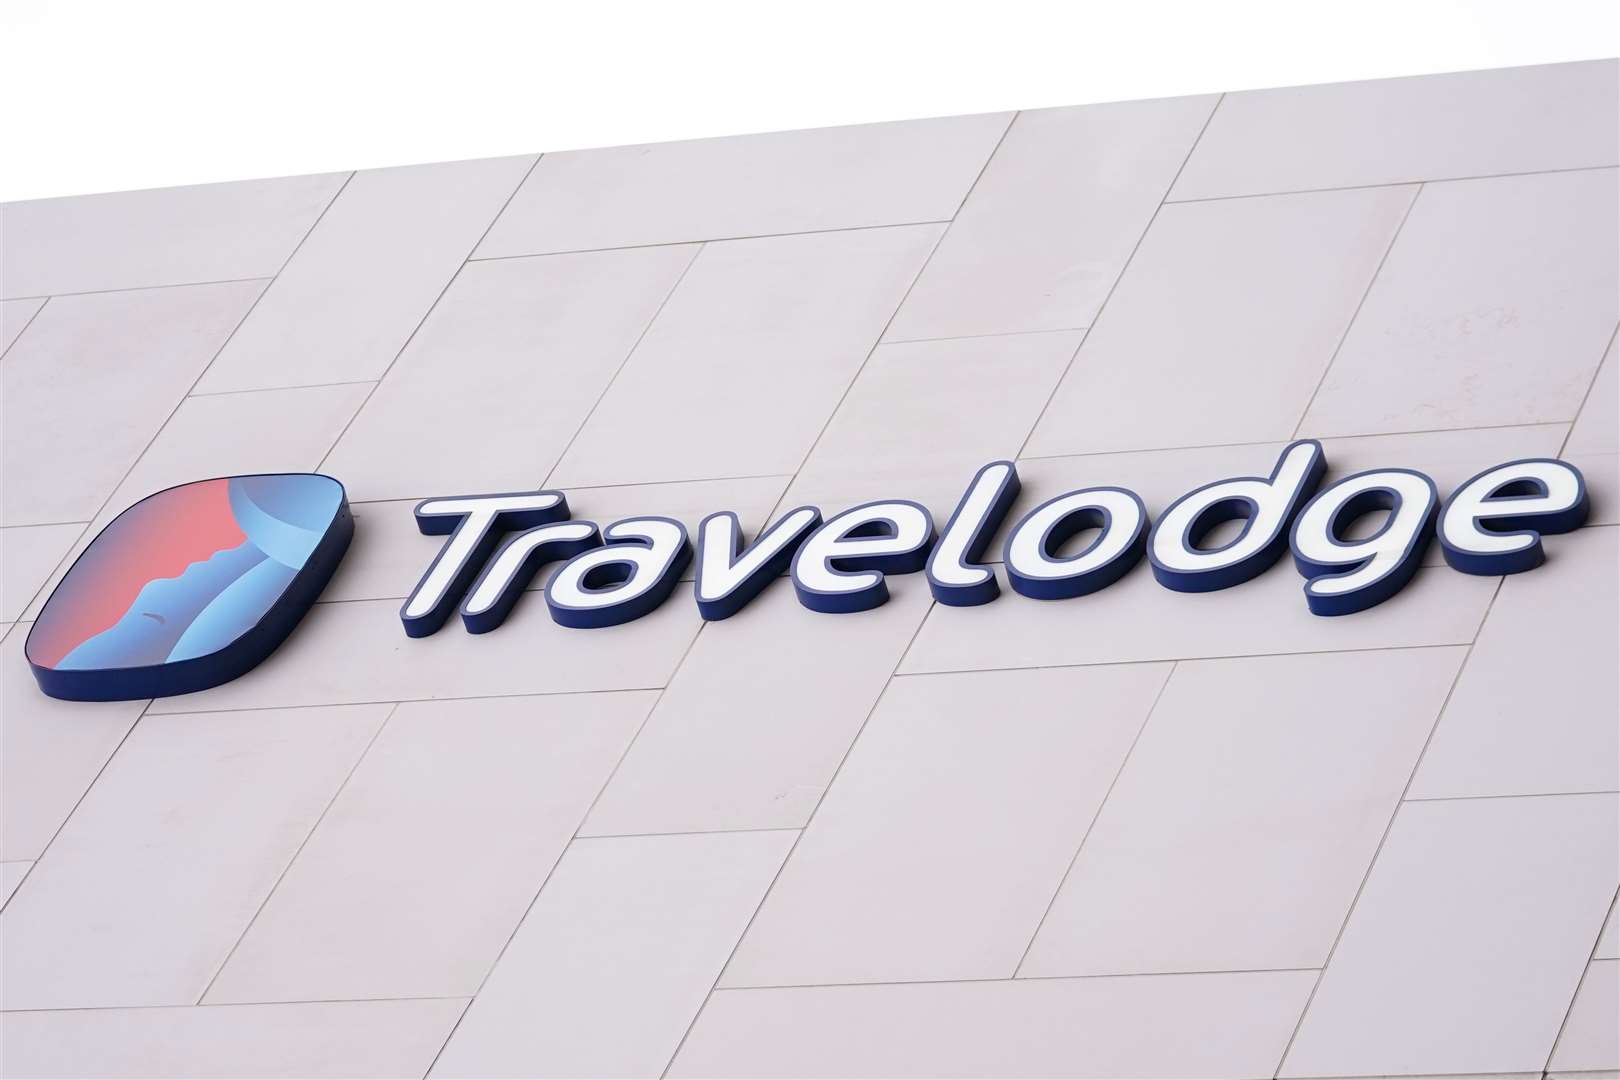 Travelodge said annual revenues surpassed £1 billion for the first time (Kirsty O’Connor/PA)